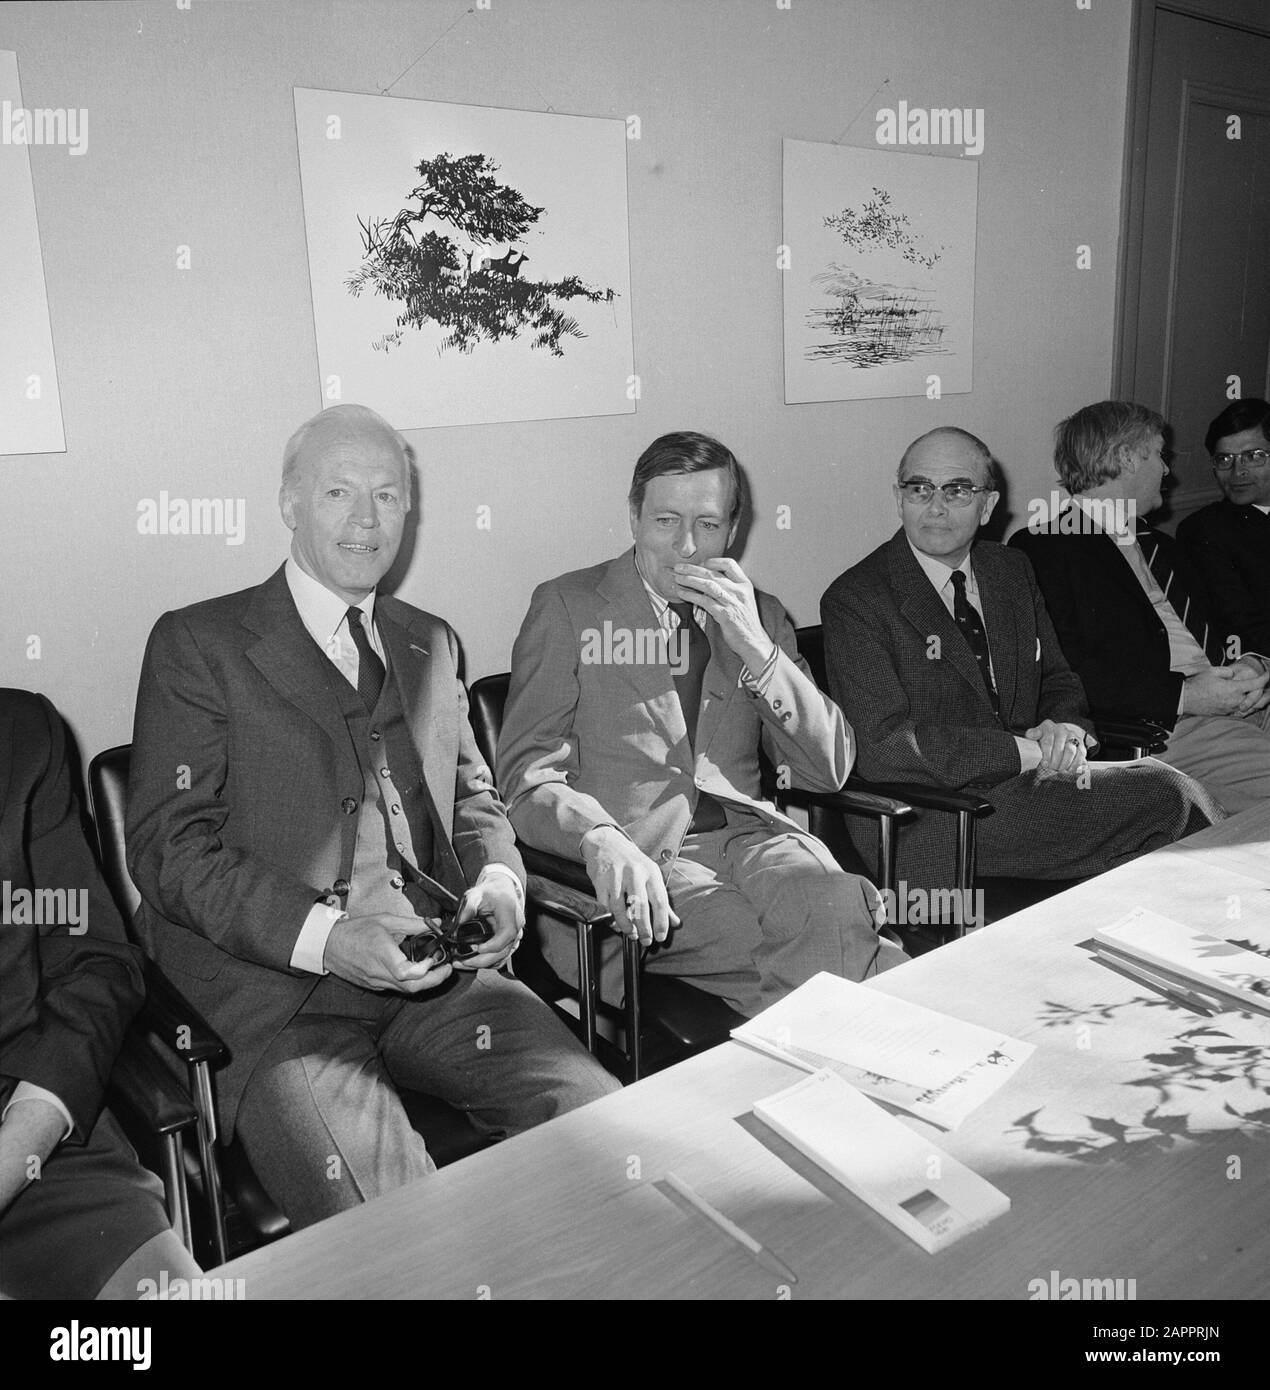 Prince Claus gets a book of Natuurmonumenten presented  Prince Claus, seated between Wouter van Dieren (l., member Club of Rome) and Marius Wagenaar Hummelinck (chairman of the World Nature Fund) Date: 19 april 1977 Keywords: books, nature management, princes Personal name: Claus (prince Netherlands), Animals, Wouter van, Wagenaar Hummelinck, Marius Stock Photo